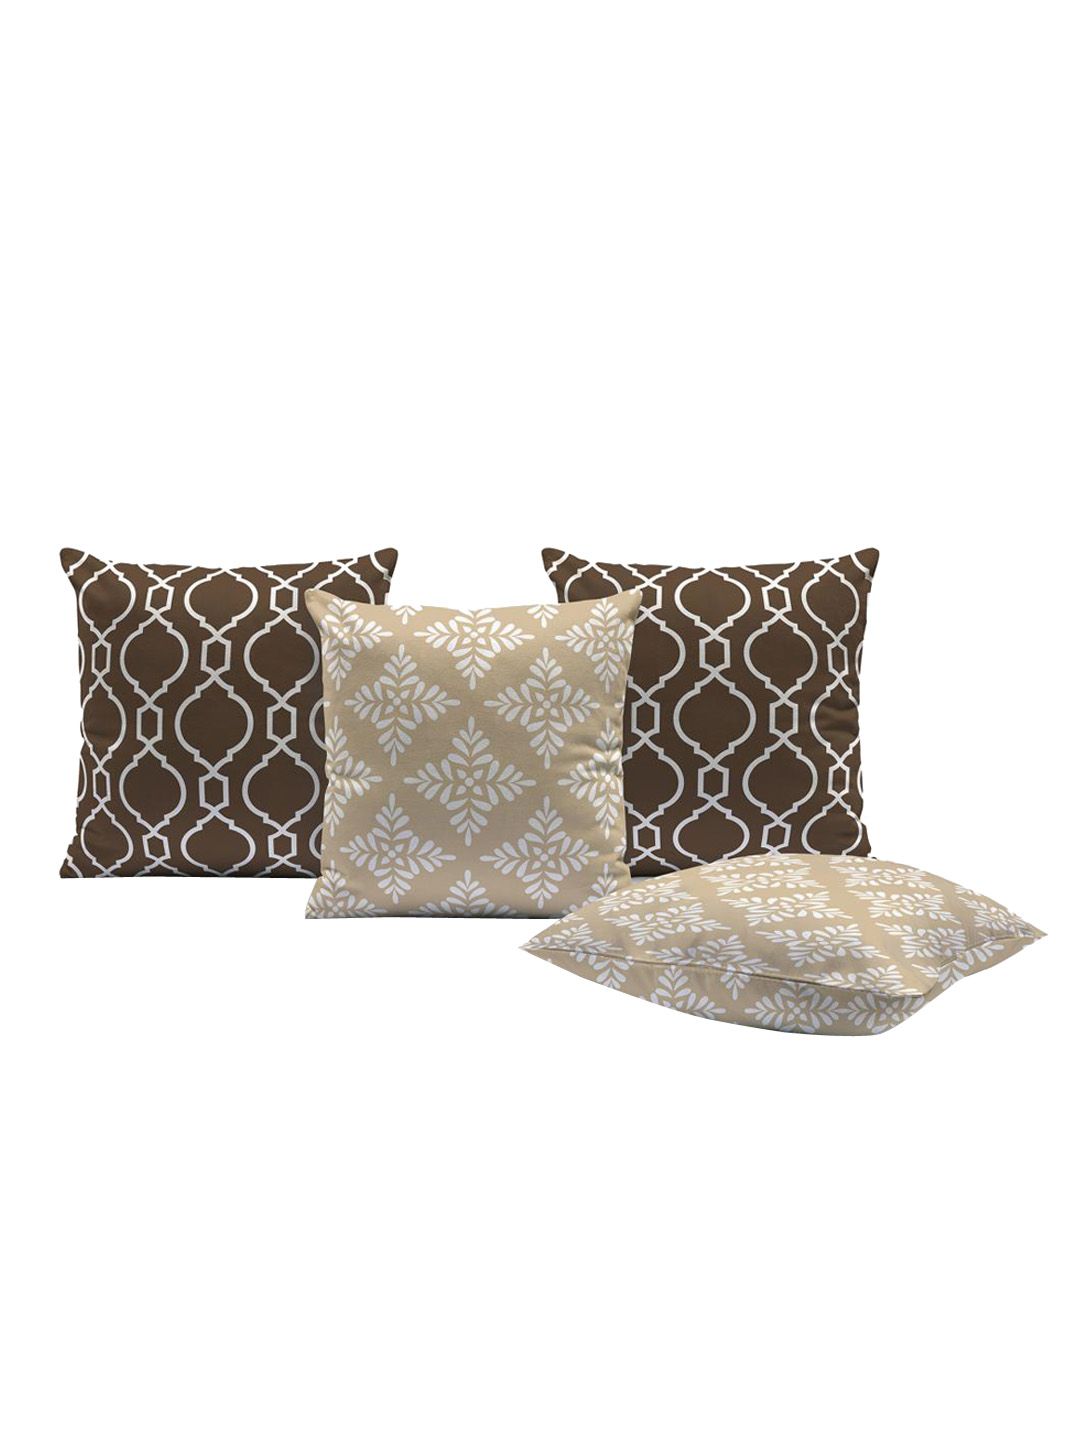 Home Centre Coffee Brown & Beige Set of 4 Geometric Printed Cotton Square Cushion Covers Price in India